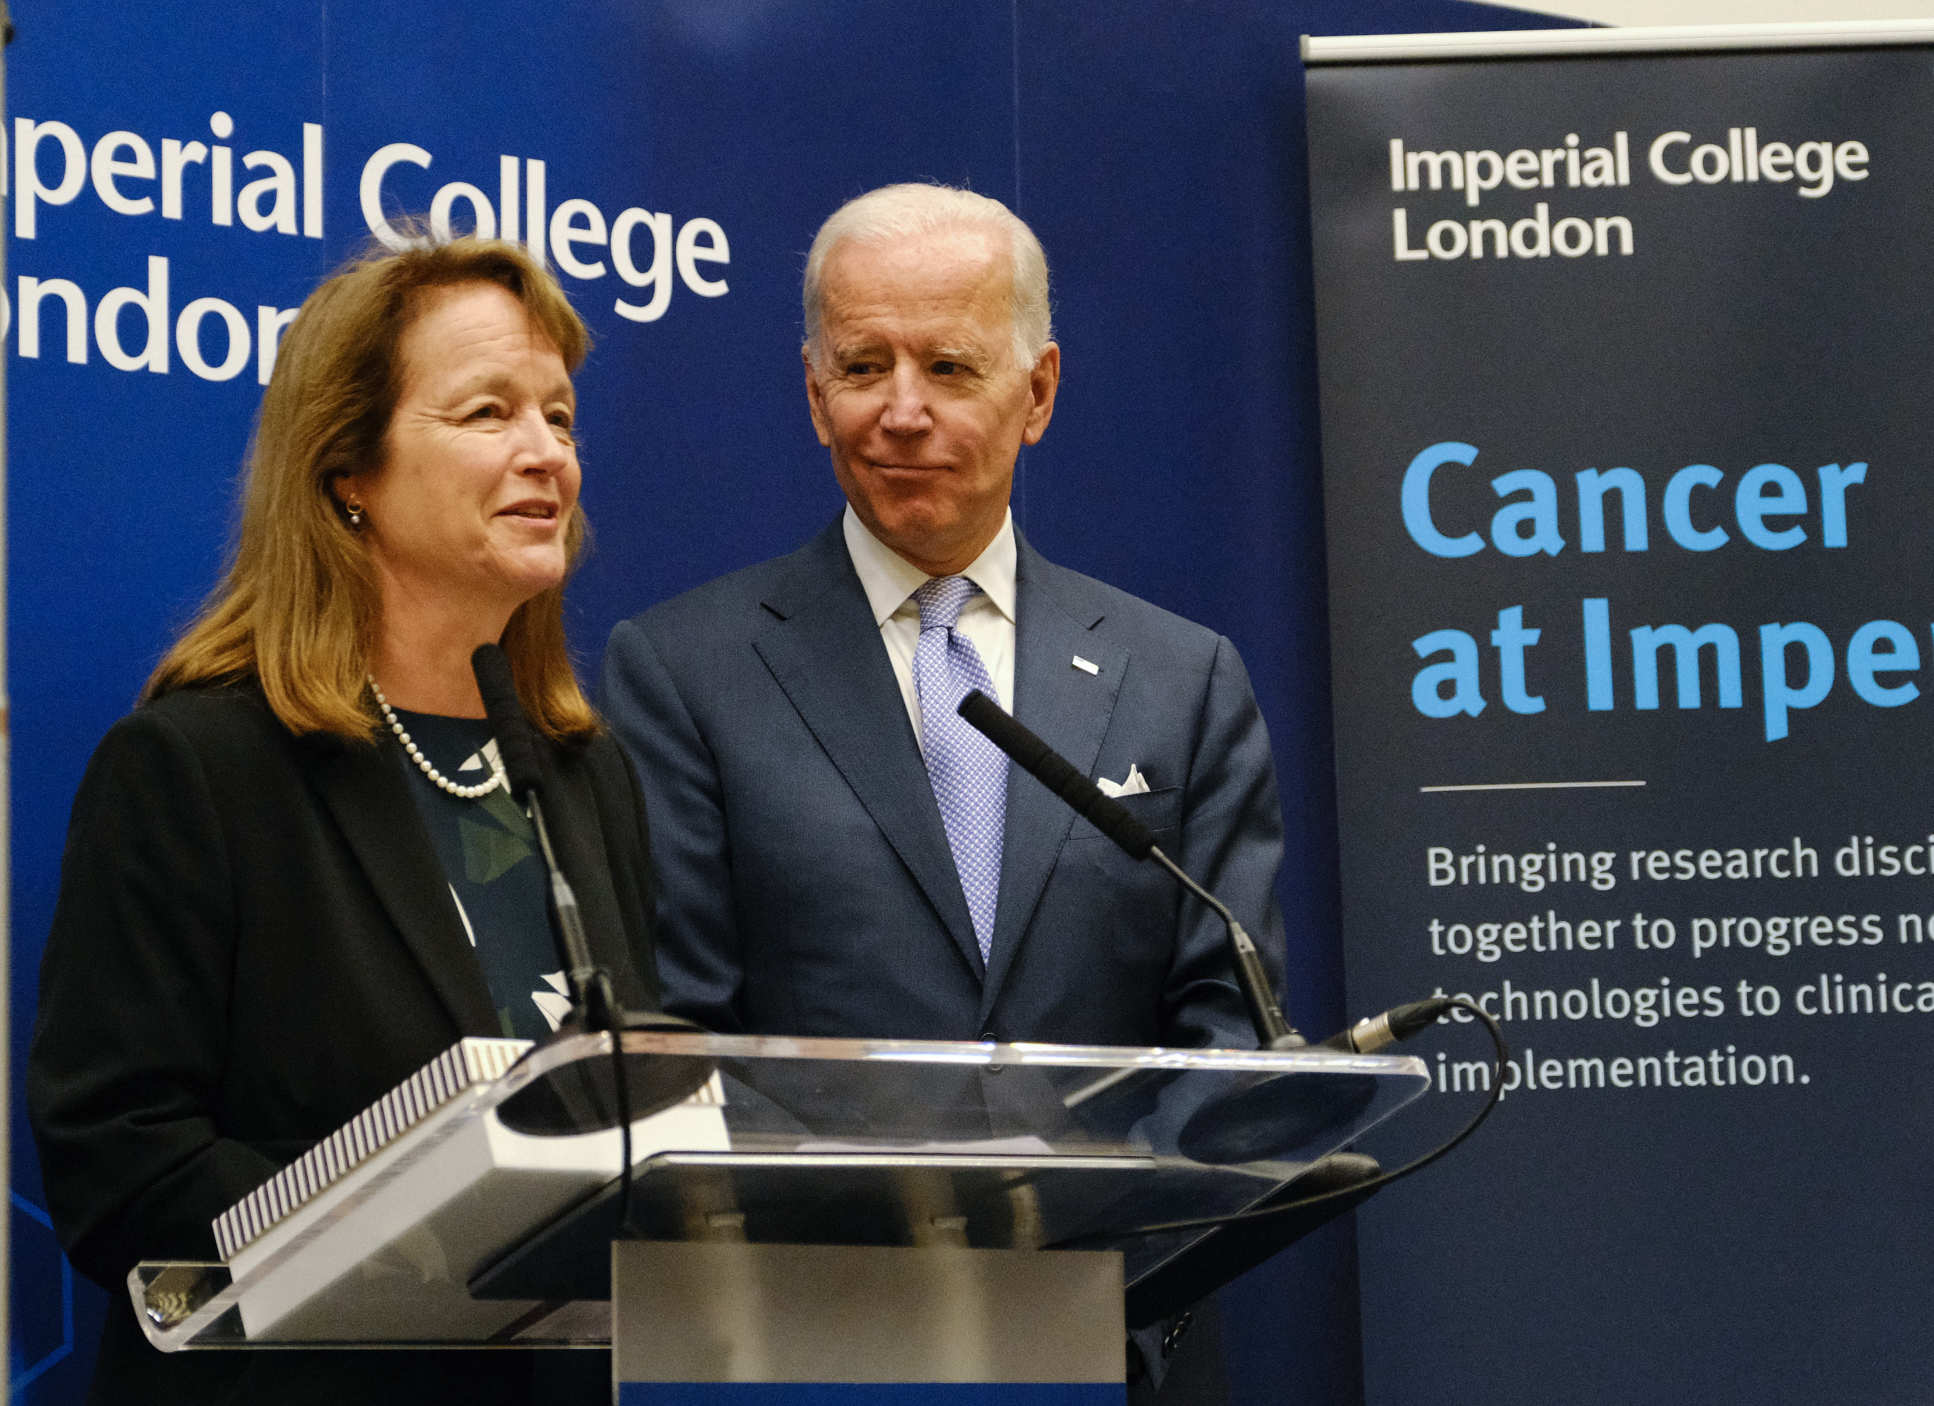 President Gast told Vice President Biden that Imperial is making discoveries that will change outcomes for cancer patients